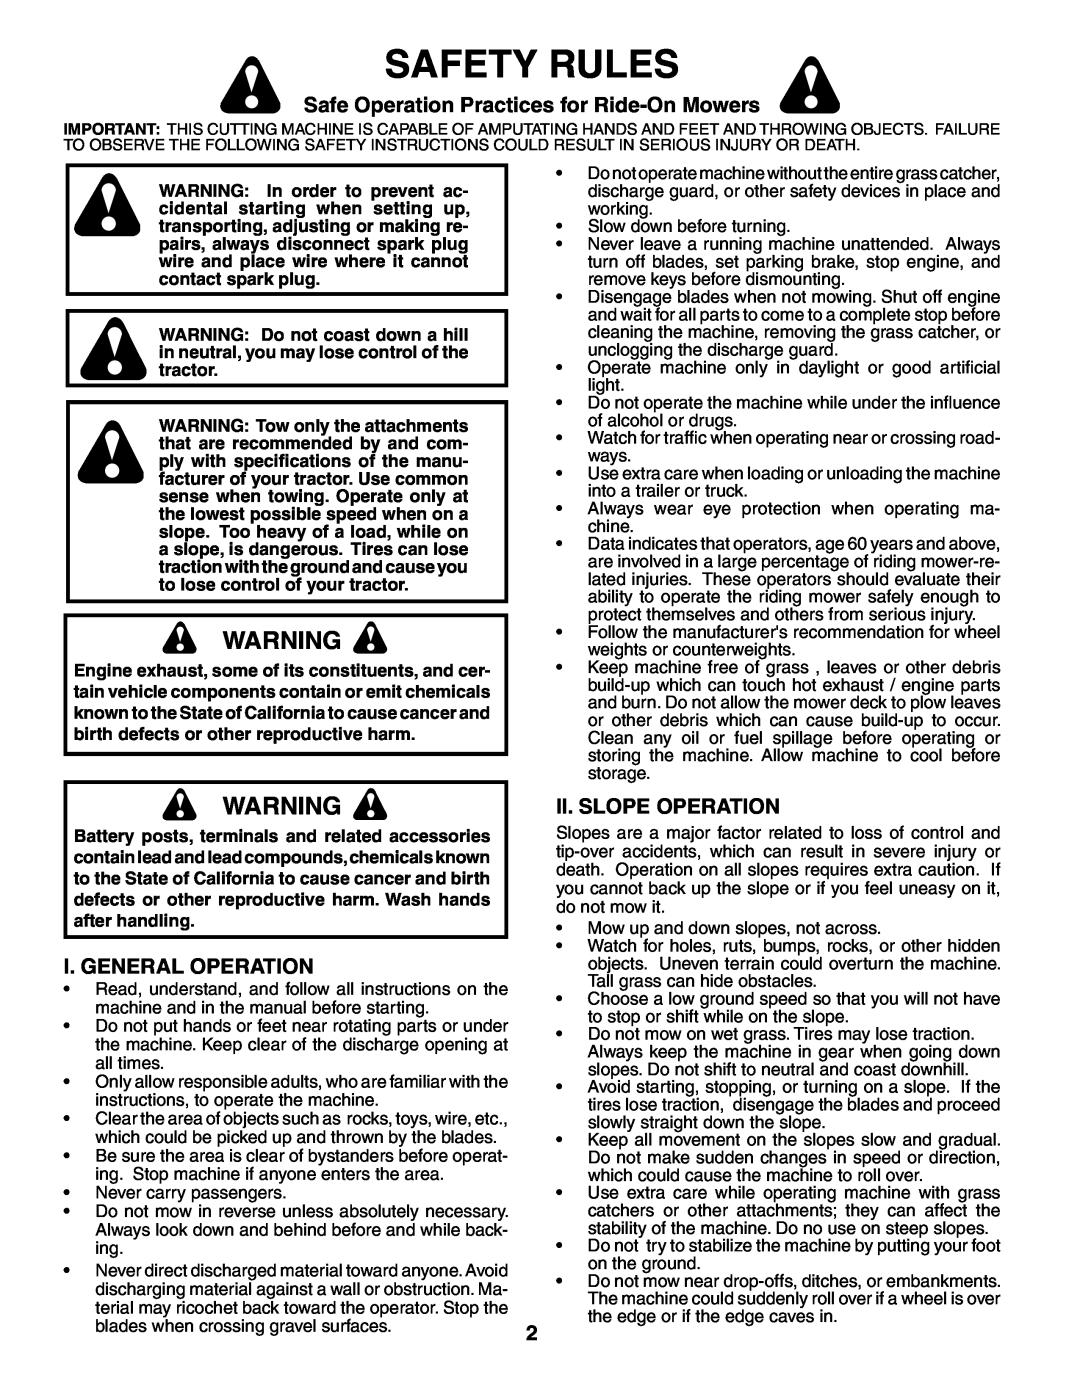 Poulan DB24H42YT Safety Rules, Safe Operation Practices for Ride-On Mowers, I. General Operation, Ii. Slope Operation 